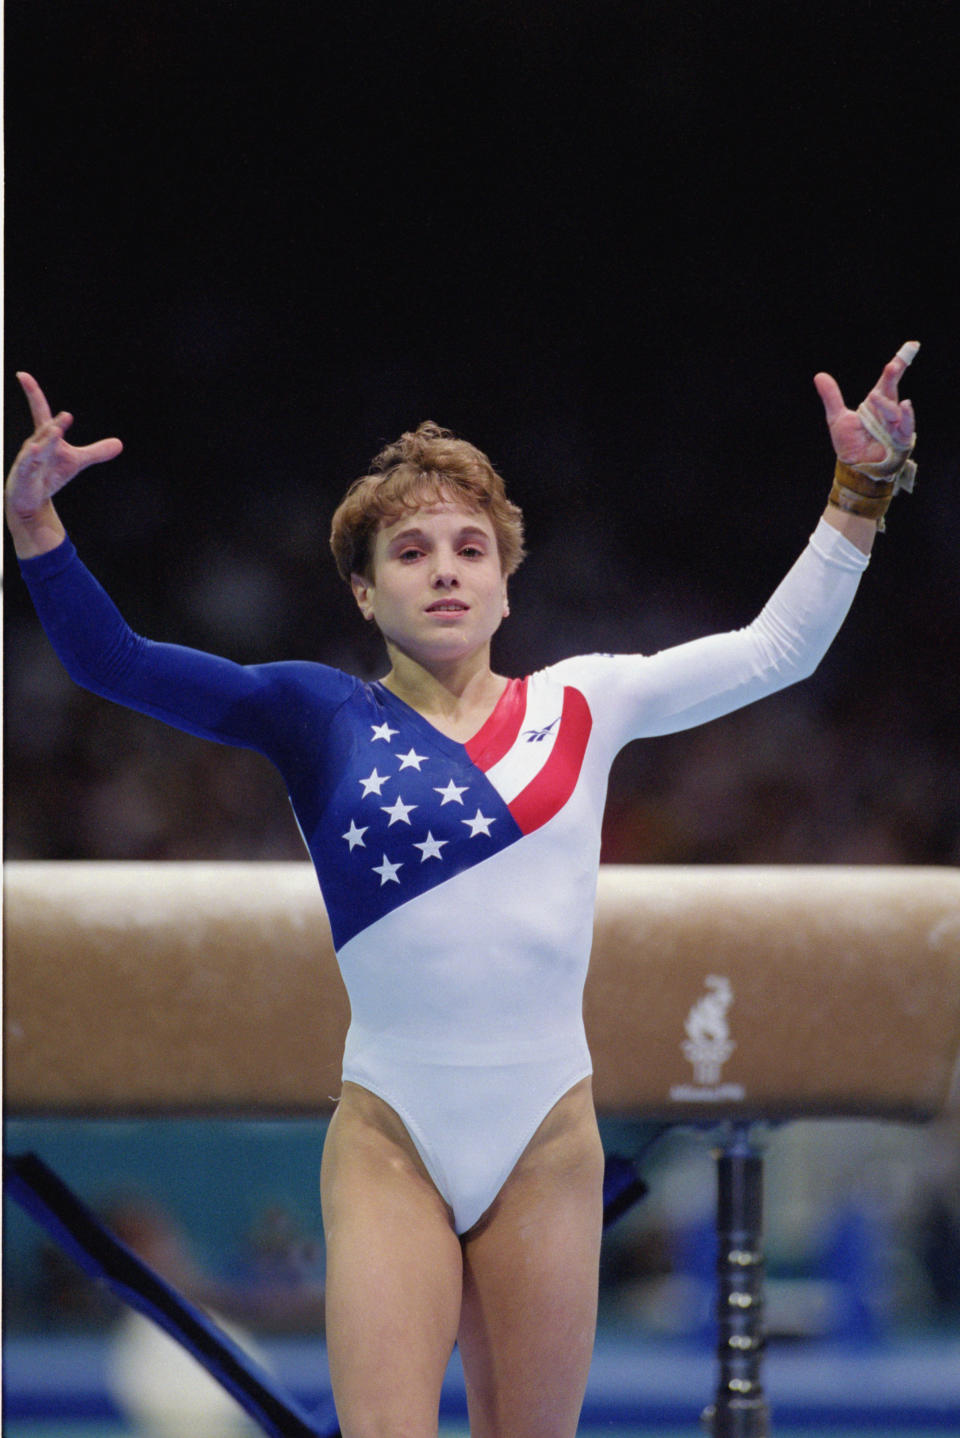 ATLANTA - JULY 23:  Kerri Strug of the United States sticks the landing on her second attempt while competing in the vault, part of the Womens Team Gymnastics competition at the 1996 Olympic Games on July 23, 1996 at the Georgia Dome in Atlanta, Georgia.  (Photo by Mike Powell/Getty Images)